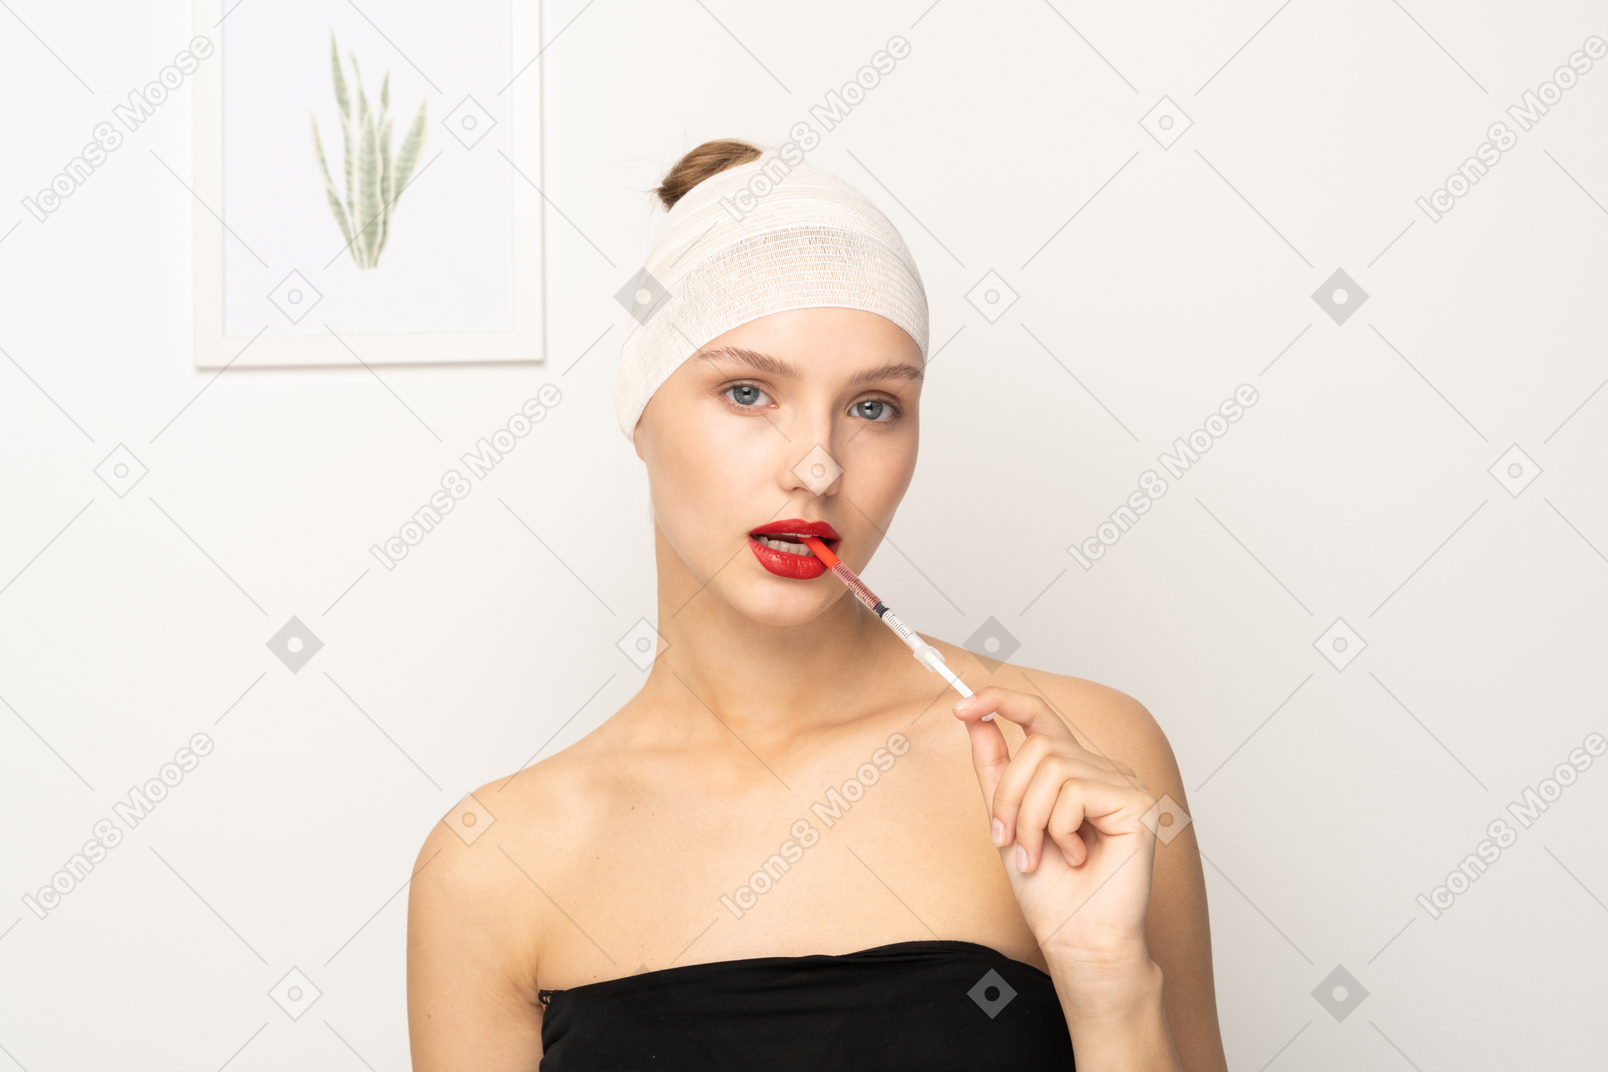 Portrait of a young woman sticking syringe into her mouth